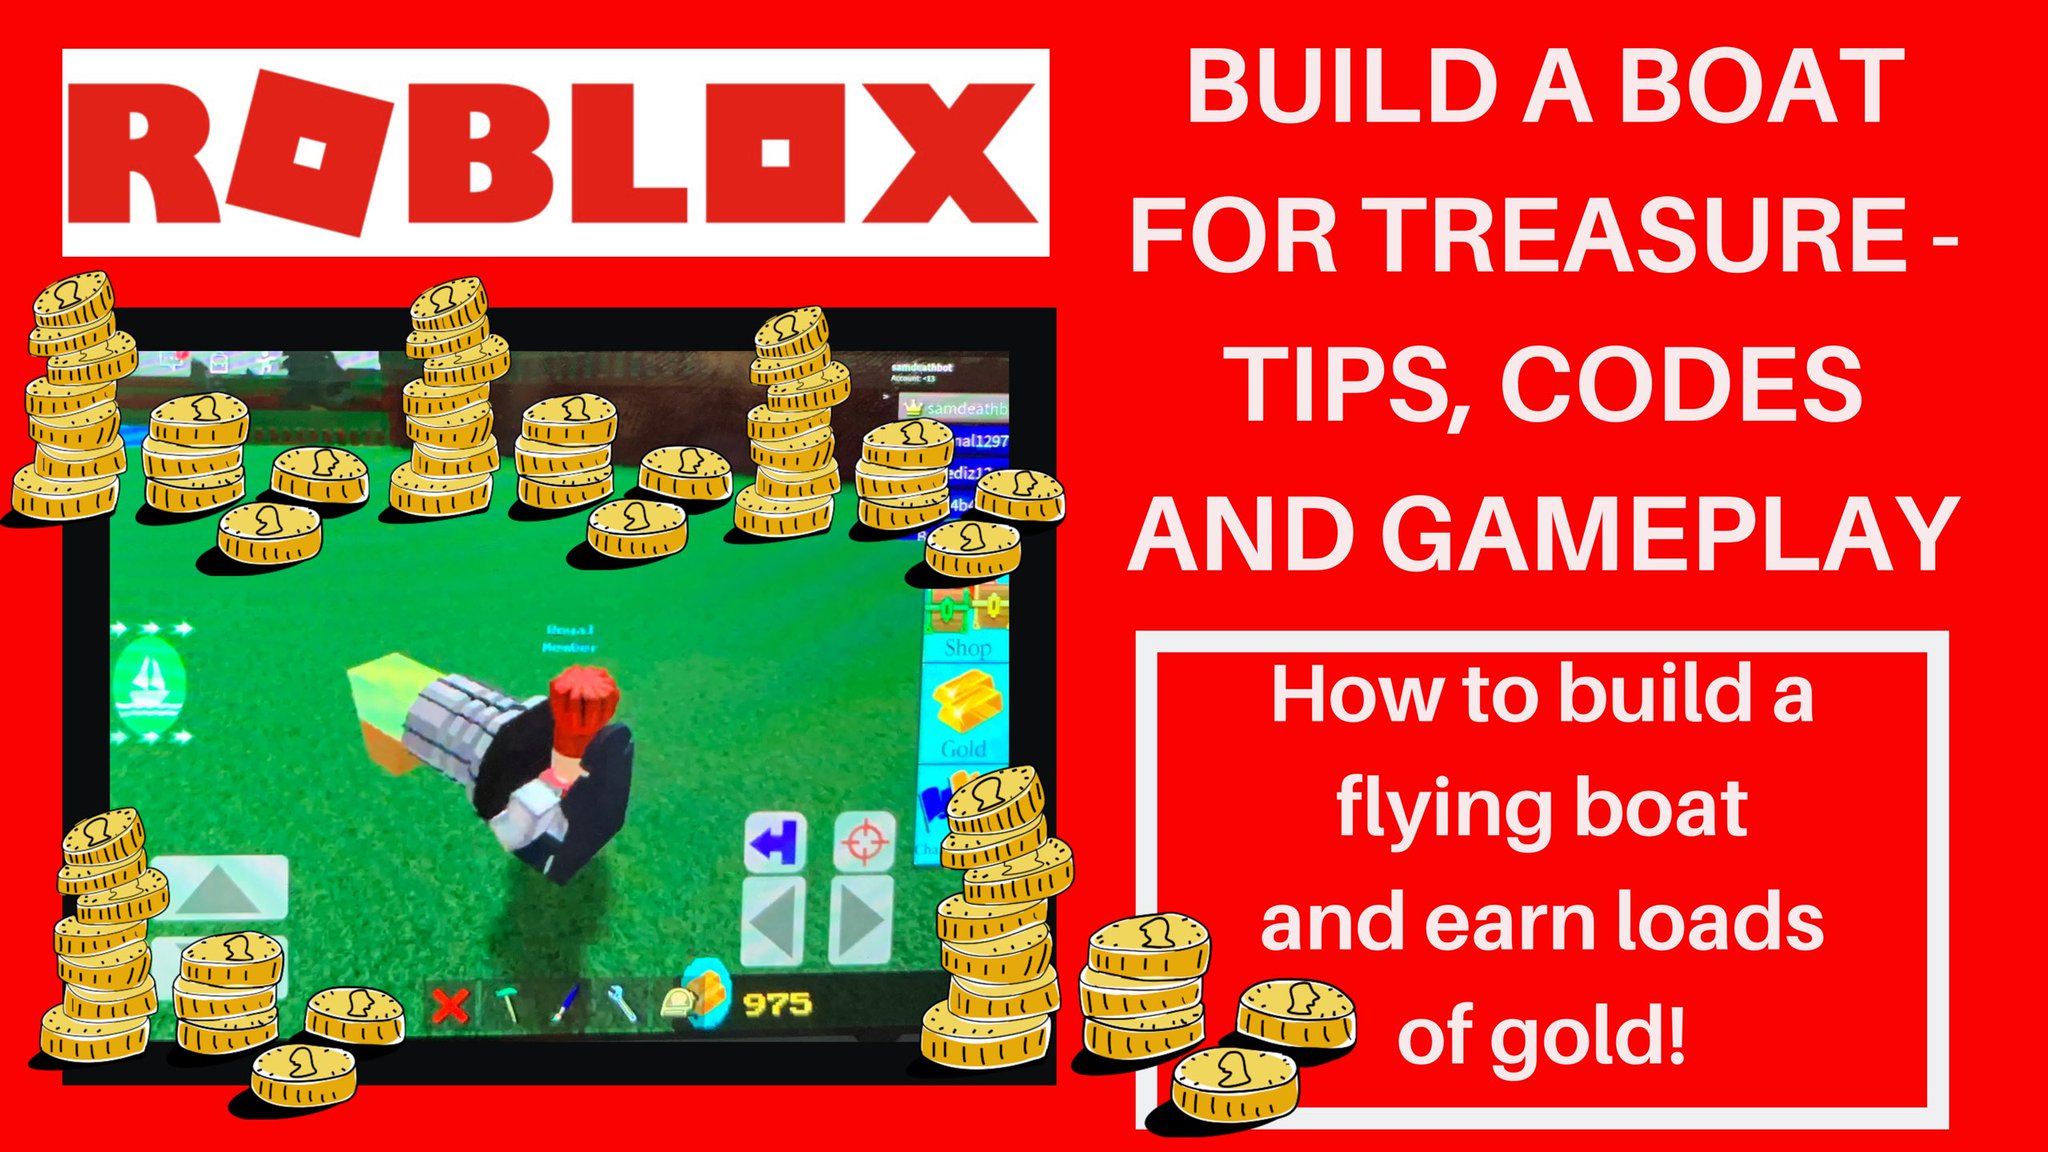 Deathbotbrothers On Twitter Roblox Build A Boat For Treasure Free Codes Game Play Make A Flying Https T Co Ntqay5sgib Via Youtube Roblox Robloxcodes Robloxfreecodes Robloxbuildaboatfortreasure Buildaboatfortreasure Robloxdemo